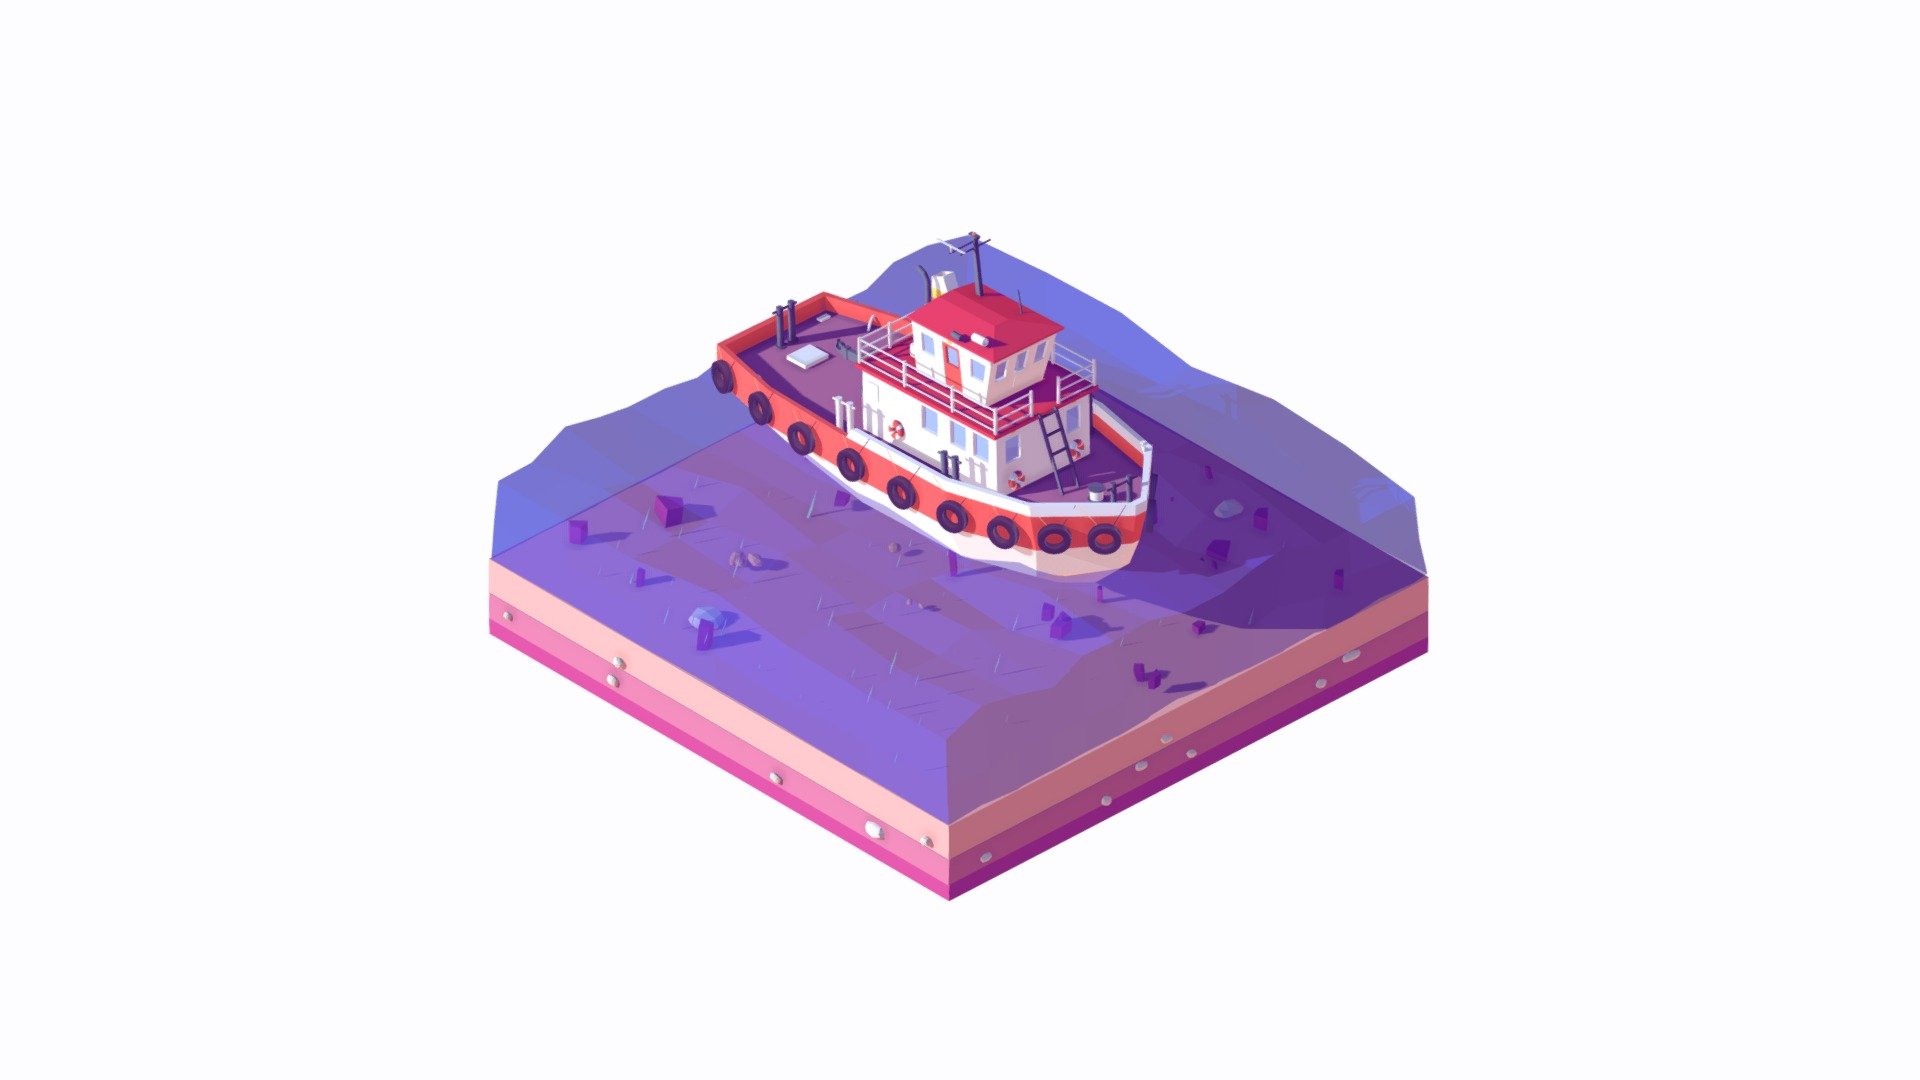 Cartoon Lowpoly Tugboat Illustration Scene

Created on Cinema 4d R17 (Render Ready on native file)

25 218 Polygons

Procedural textured

Game Ready
 - Cartoon Lowpoly Tugboat Illustration - Download Free 3D model by antonmoek 3d model